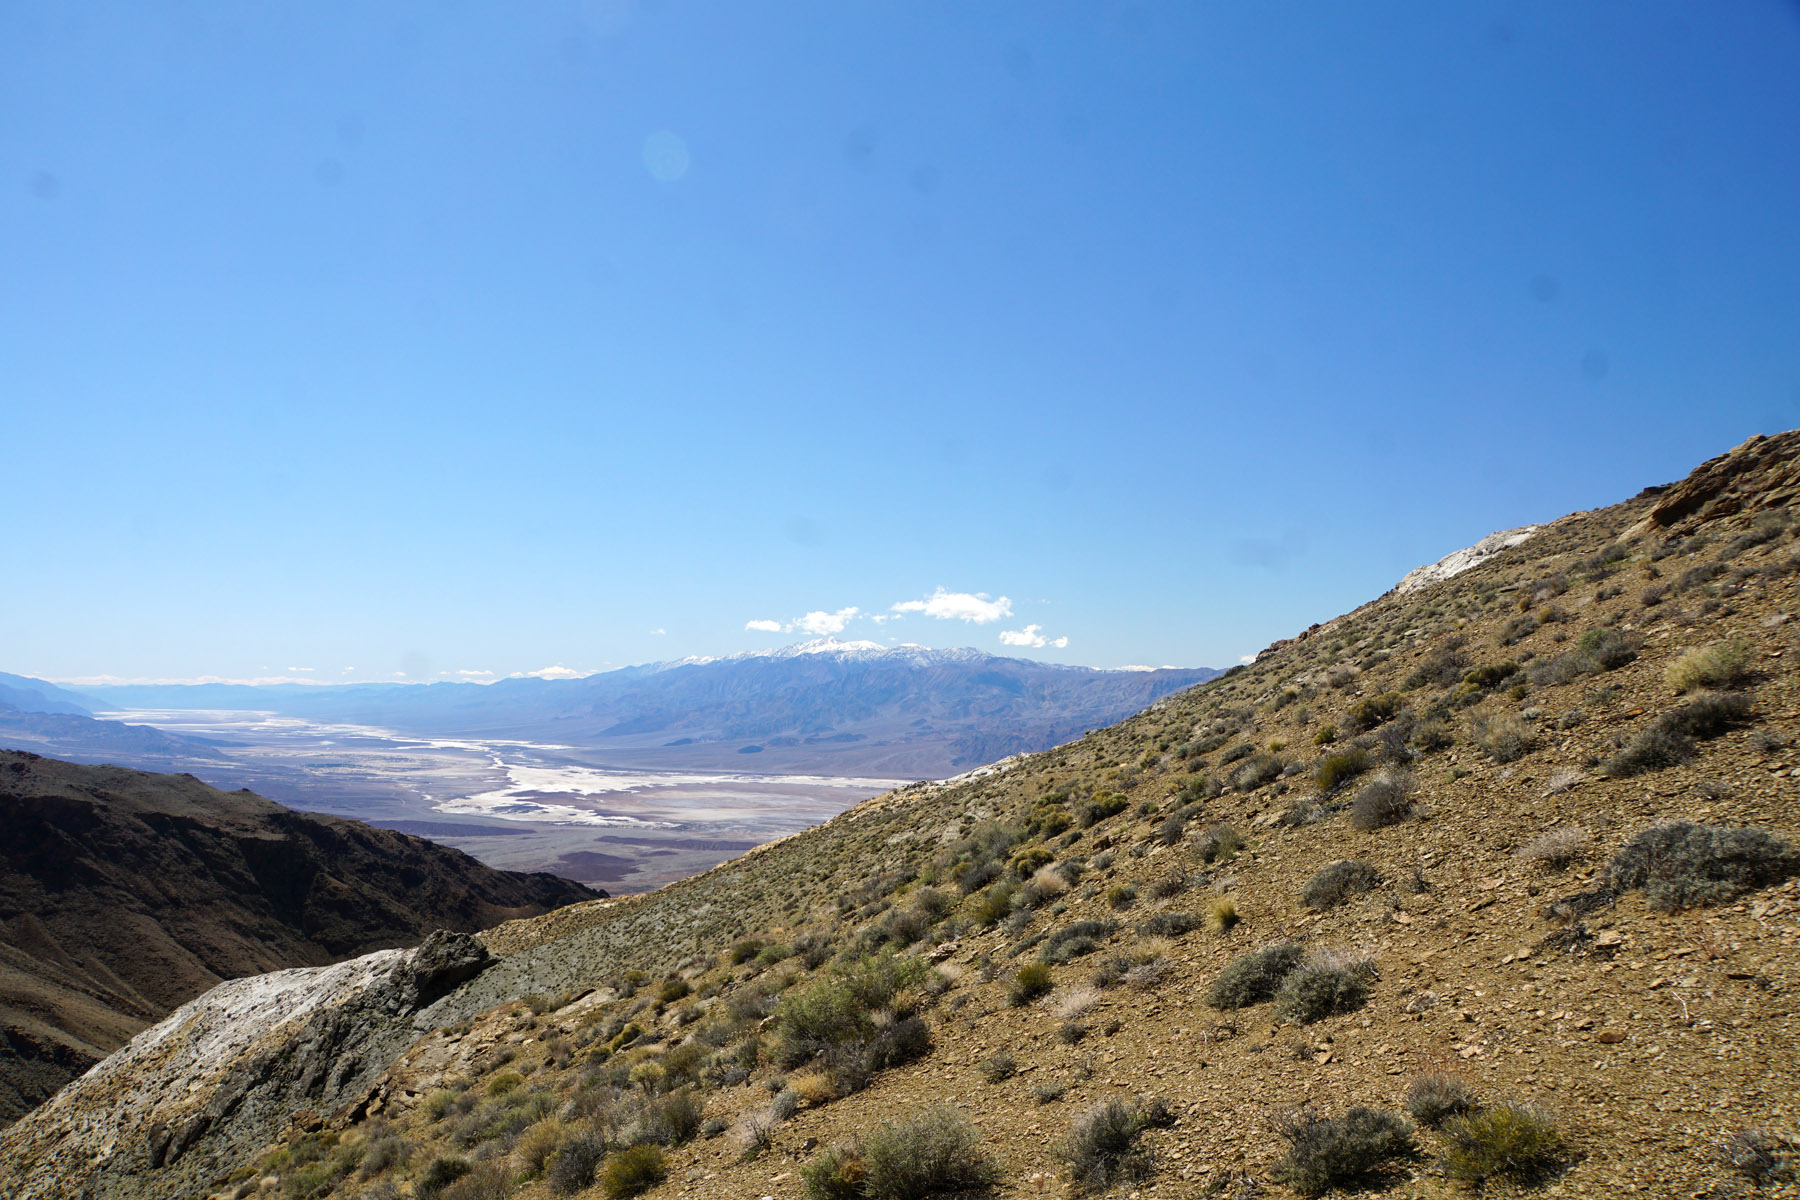 Telescope Peak and Death Valley seen from Chloride Cliffs